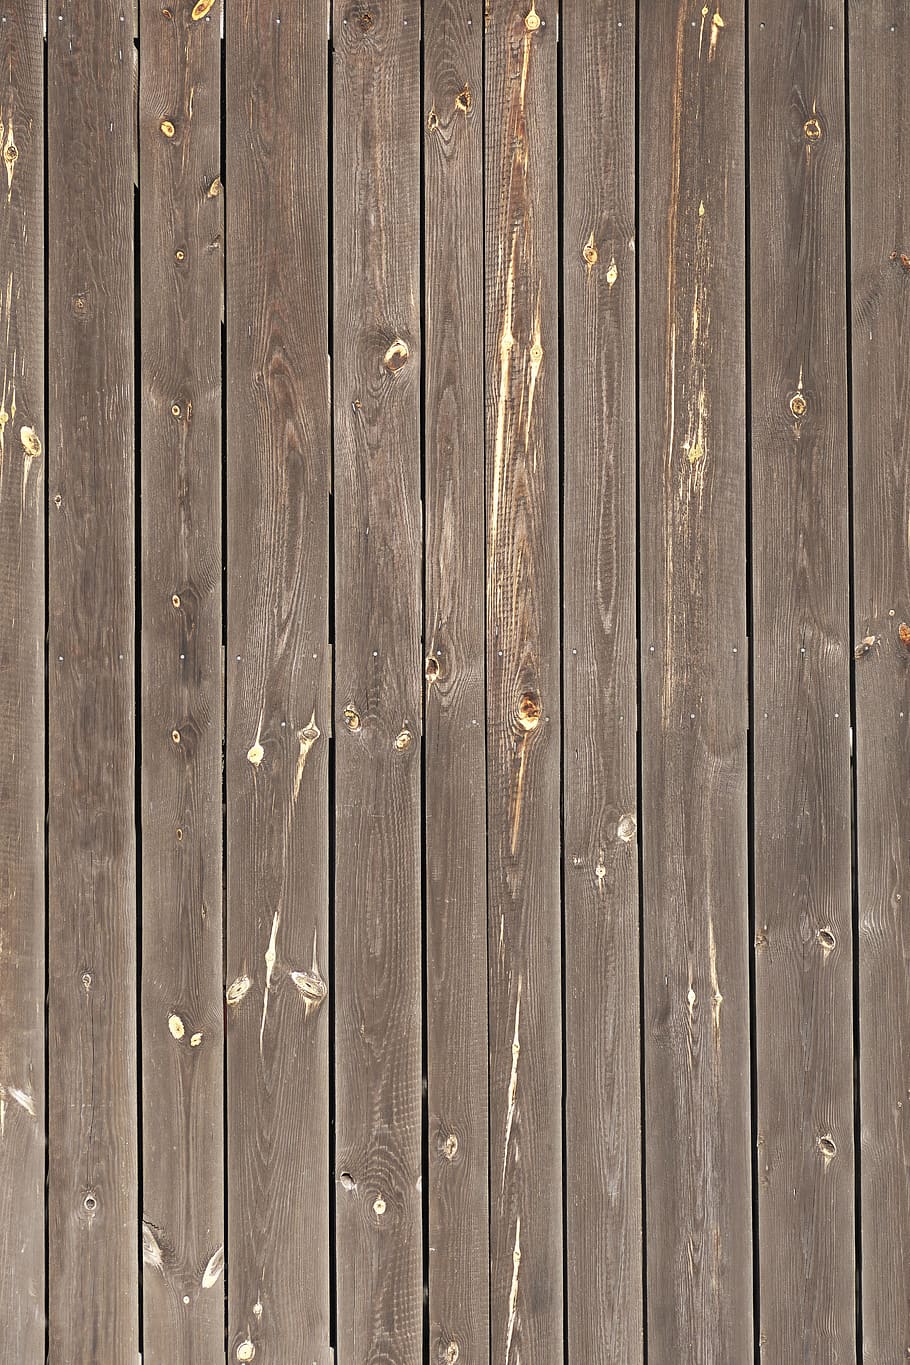 wooden boards, boards, wooden gate, old, weathered, branches, battens, wood, board, background